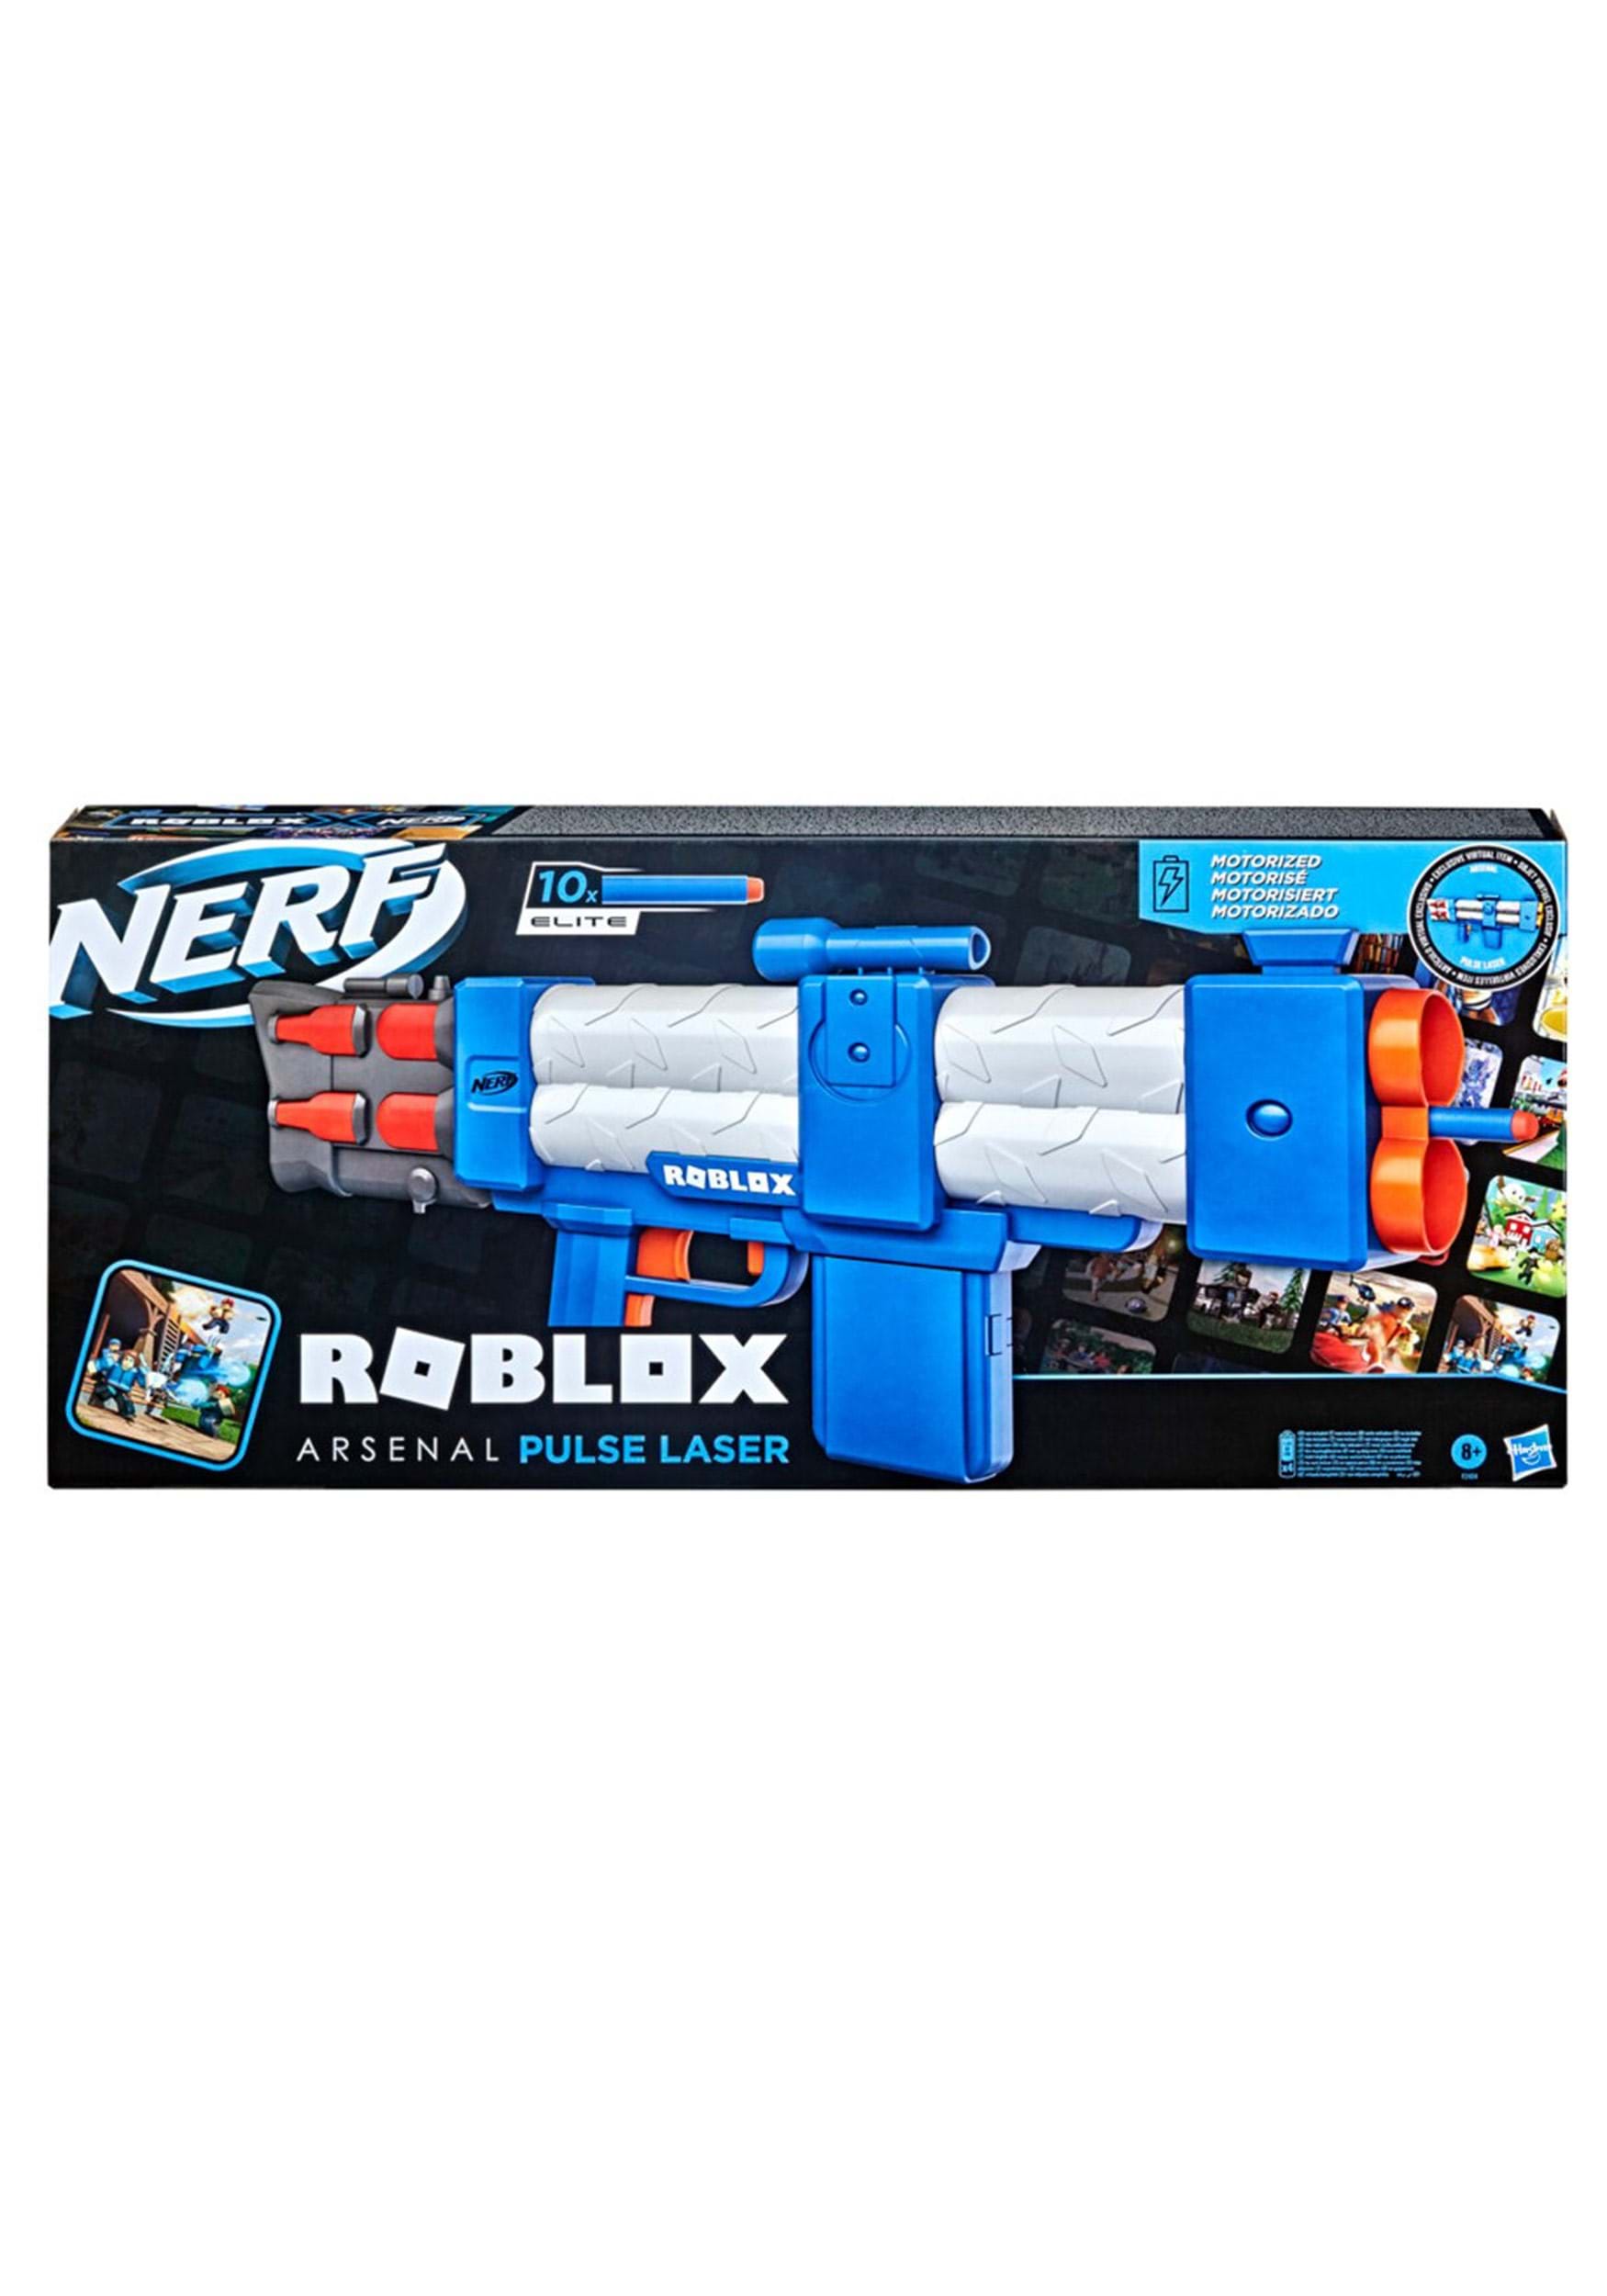 Bring Roblox to Life With NERF - MM2 Shark Seeker and Adopt Me